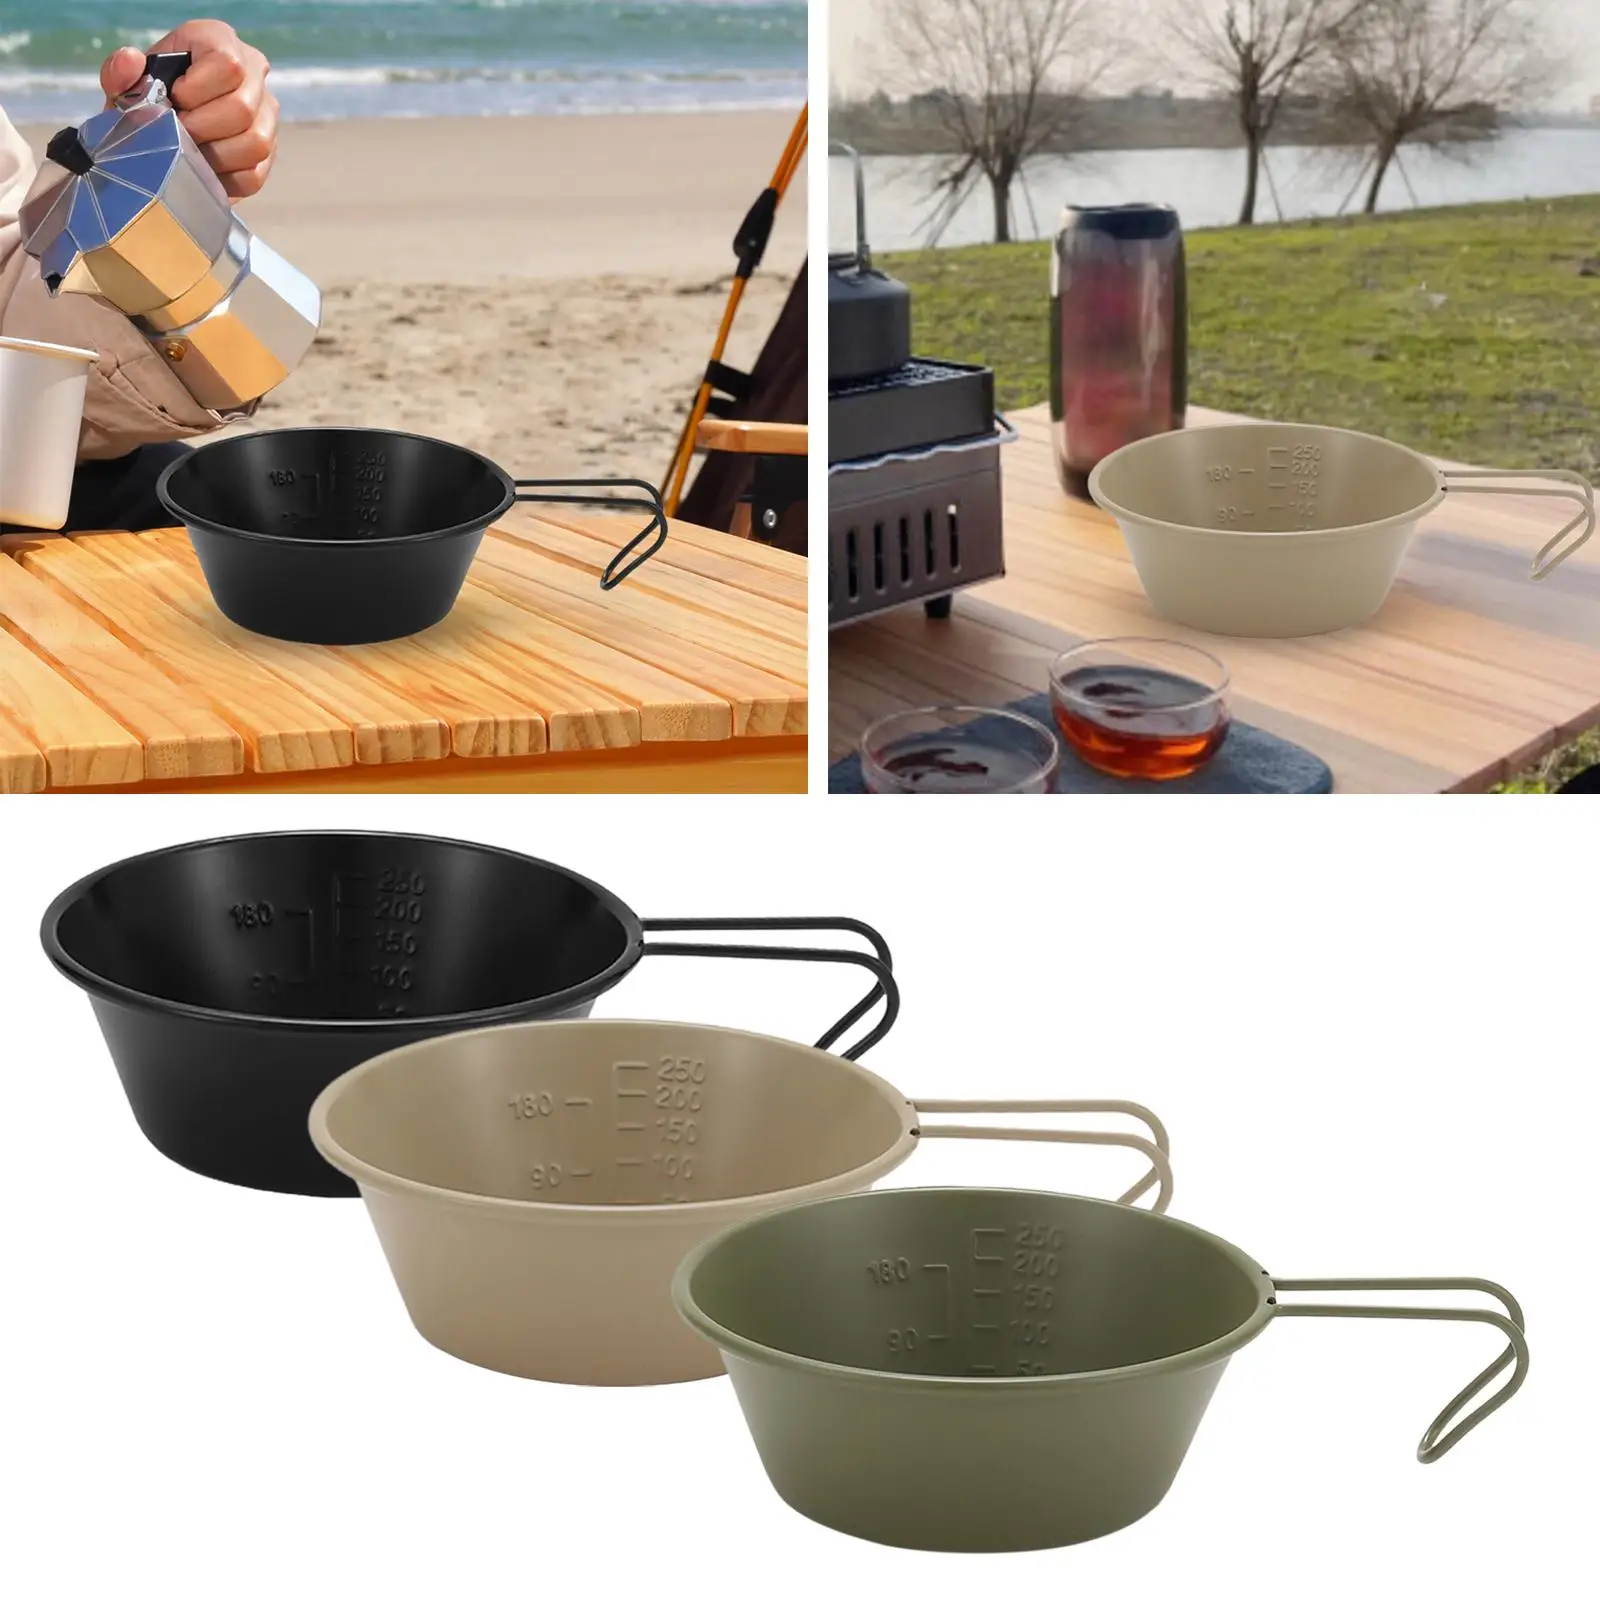 Stainless Steel Bowl Outdoor Cookware Beach Cooking Traveling Camping Cups